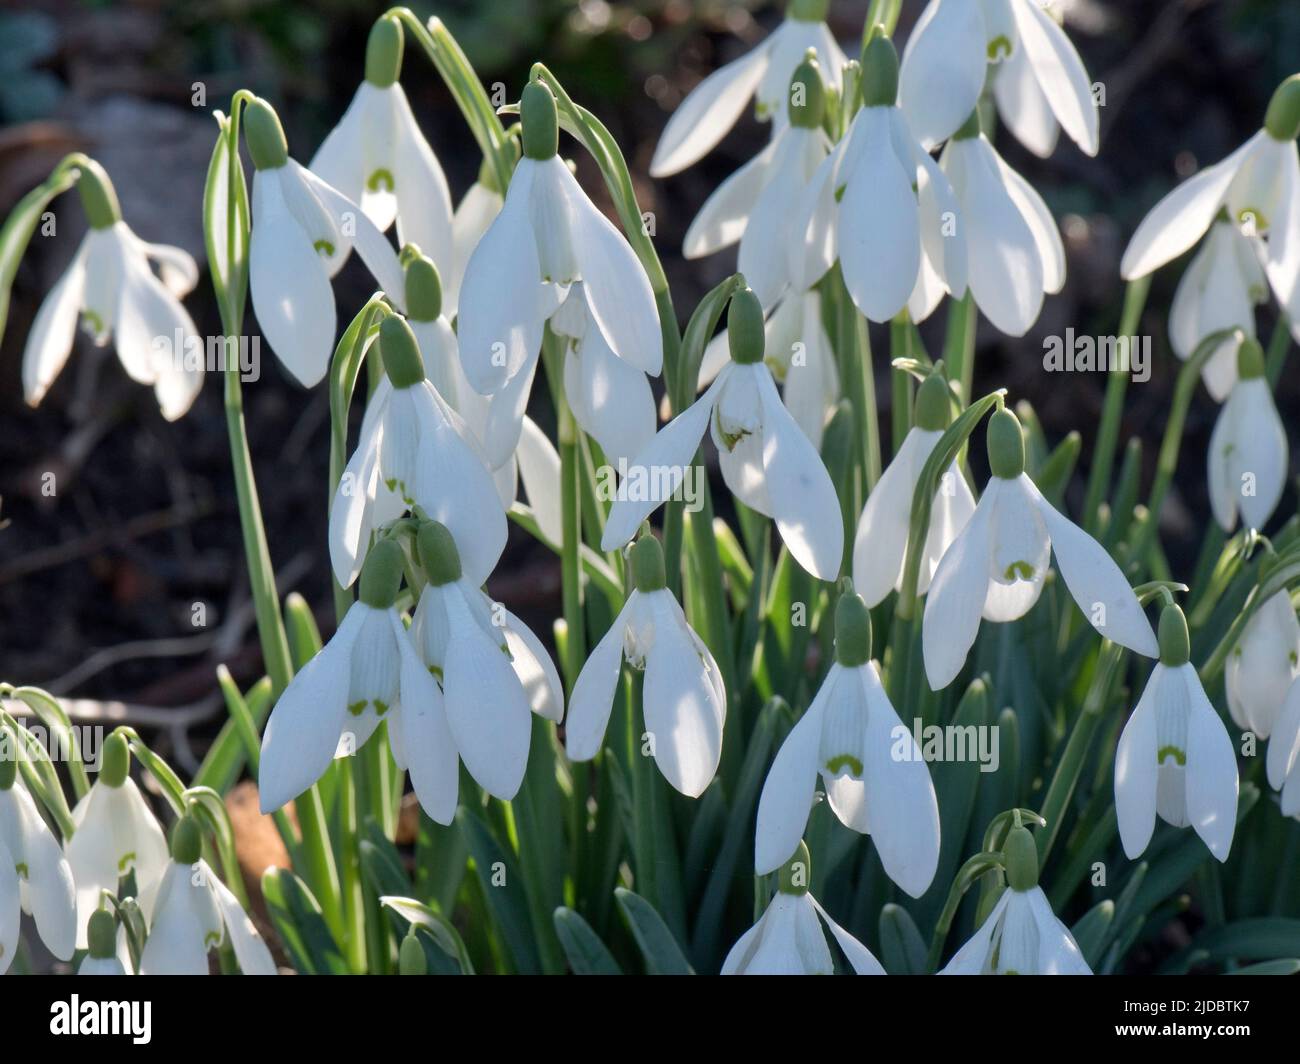 White flowers of snowdrops (Galanthus nivalis) back lit by sunlight under heavy shade in late winter, Berkshire, February Stock Photo